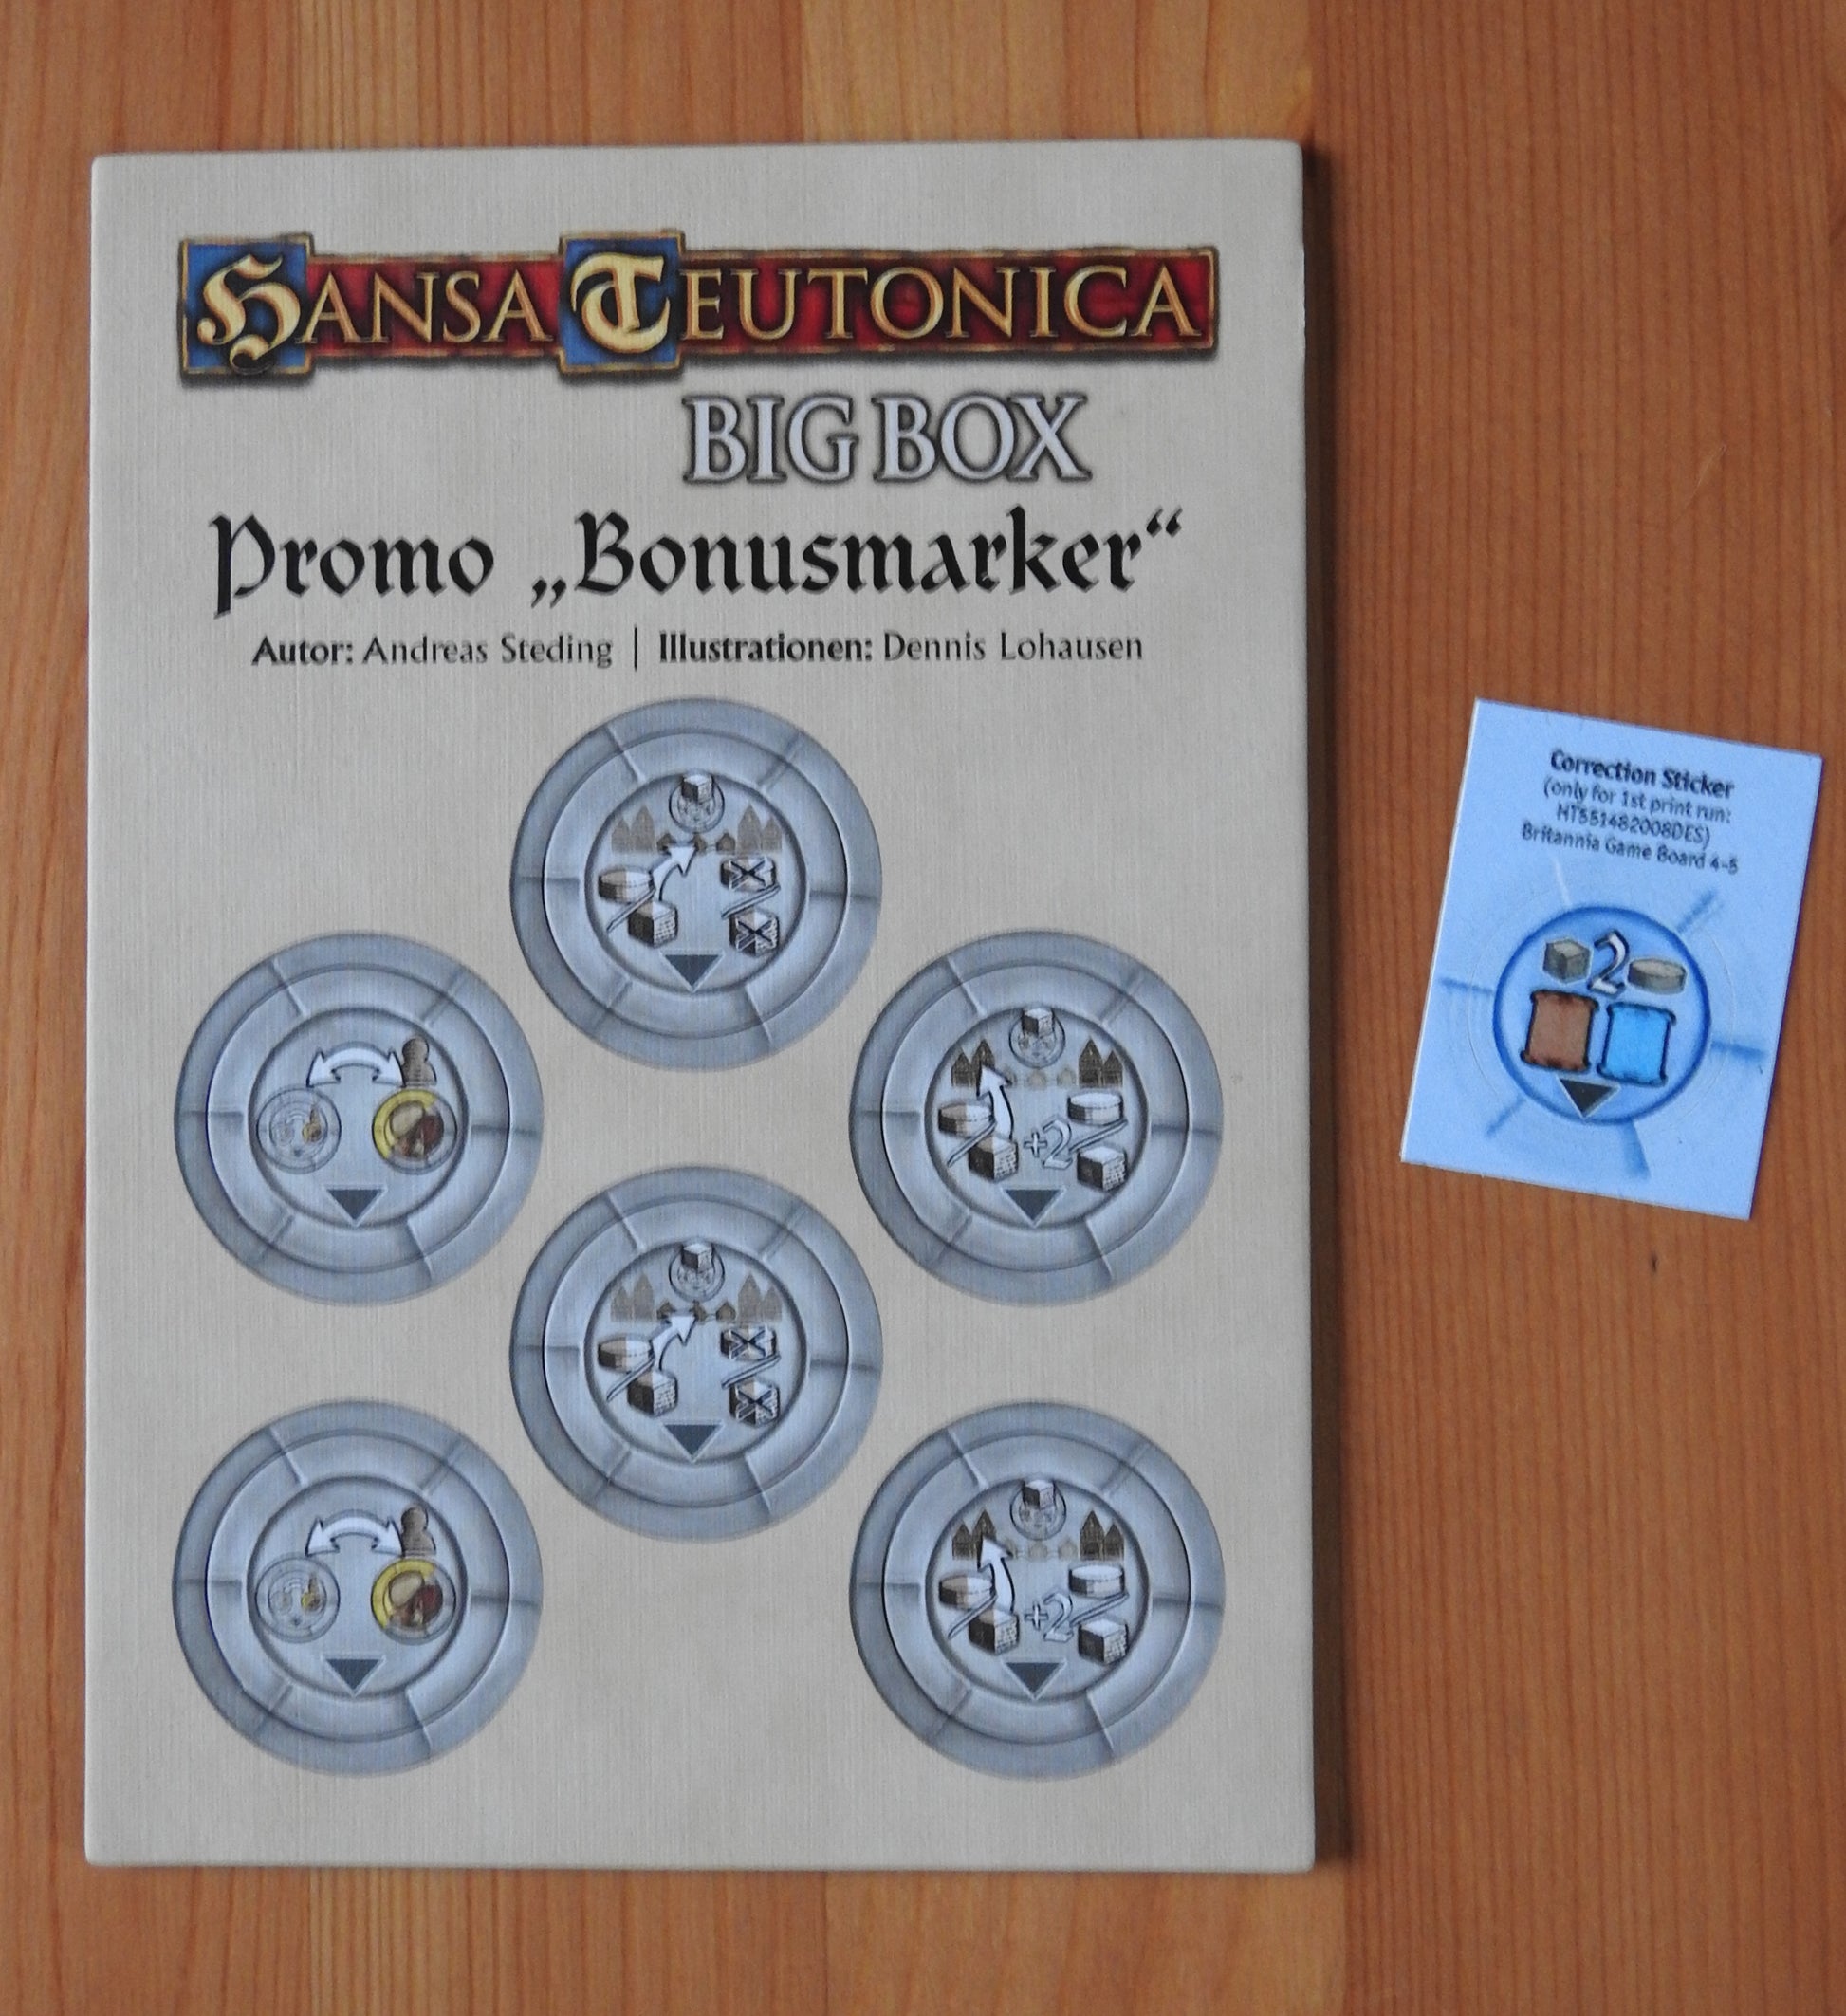 View of the 6 new bonus markers, along with the correction sticker, that are included in this mini expansion for Hansa Teutonica.